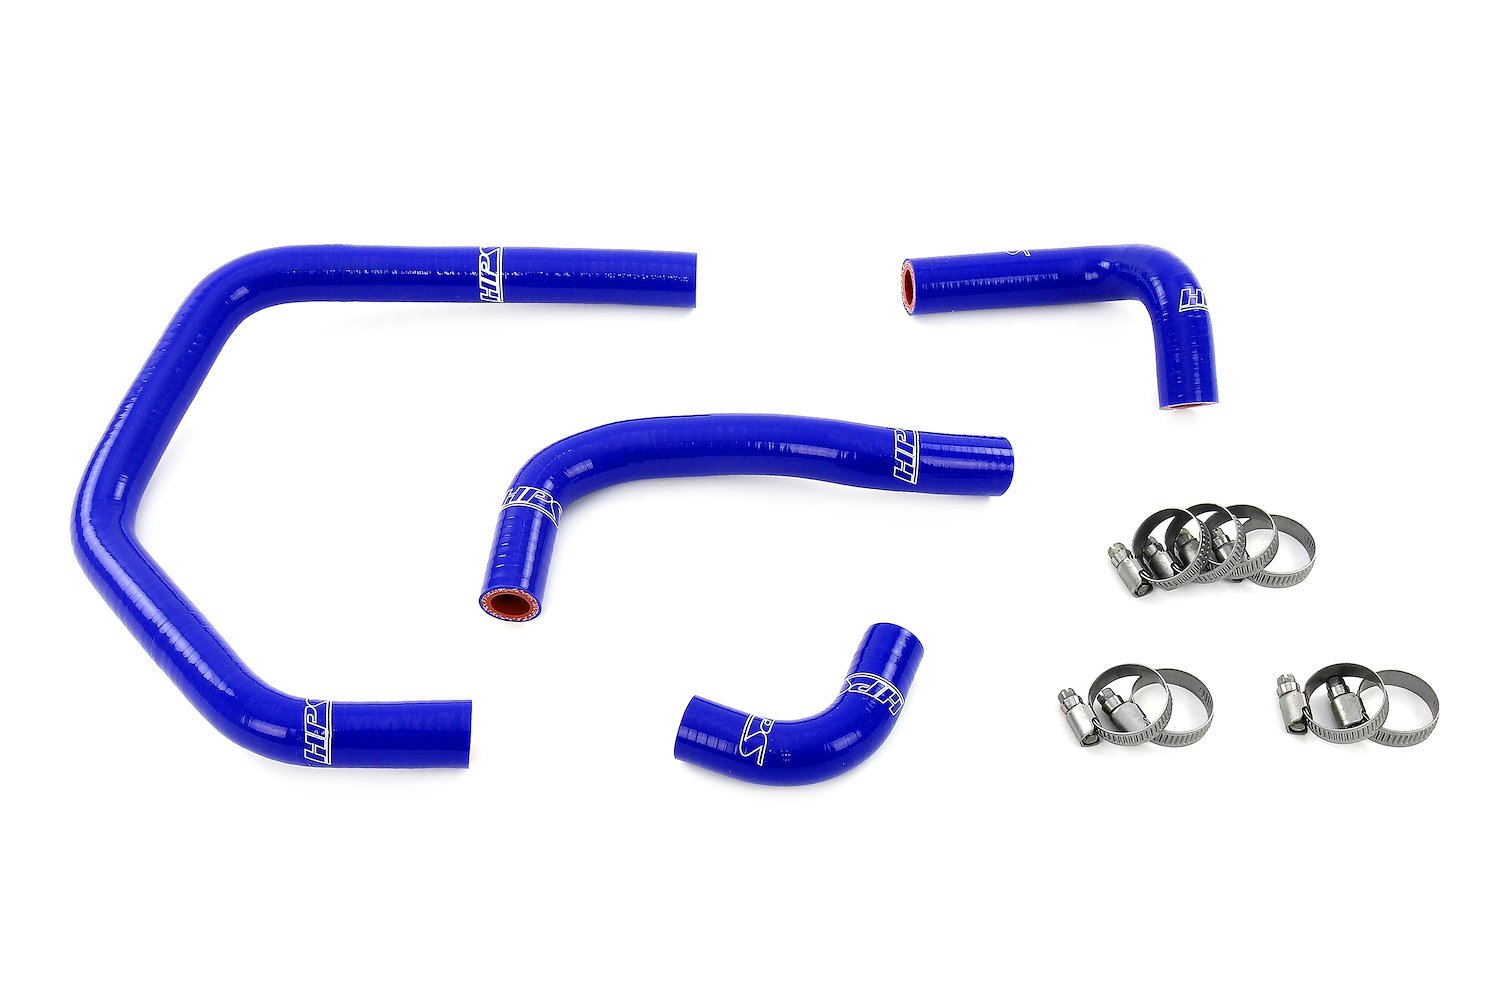 57-2145-BLUE Heater Hose Kit, 3-Ply Reinforced Silicone, Replaces Rubber Heater Coolant Hoses